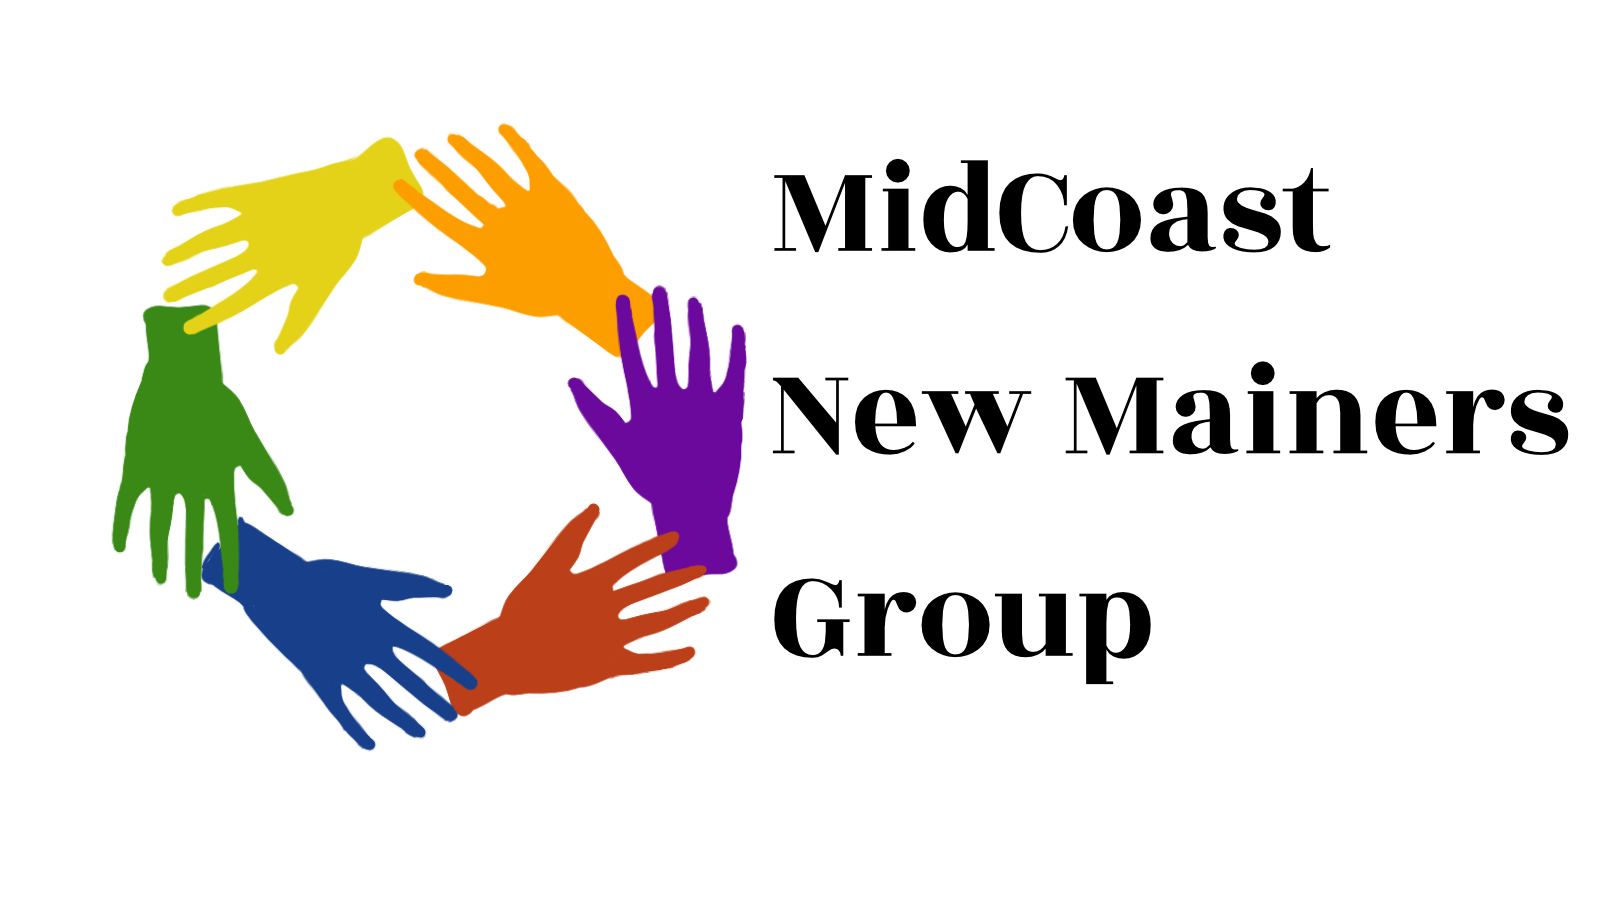 Midcoast New Mainers Group